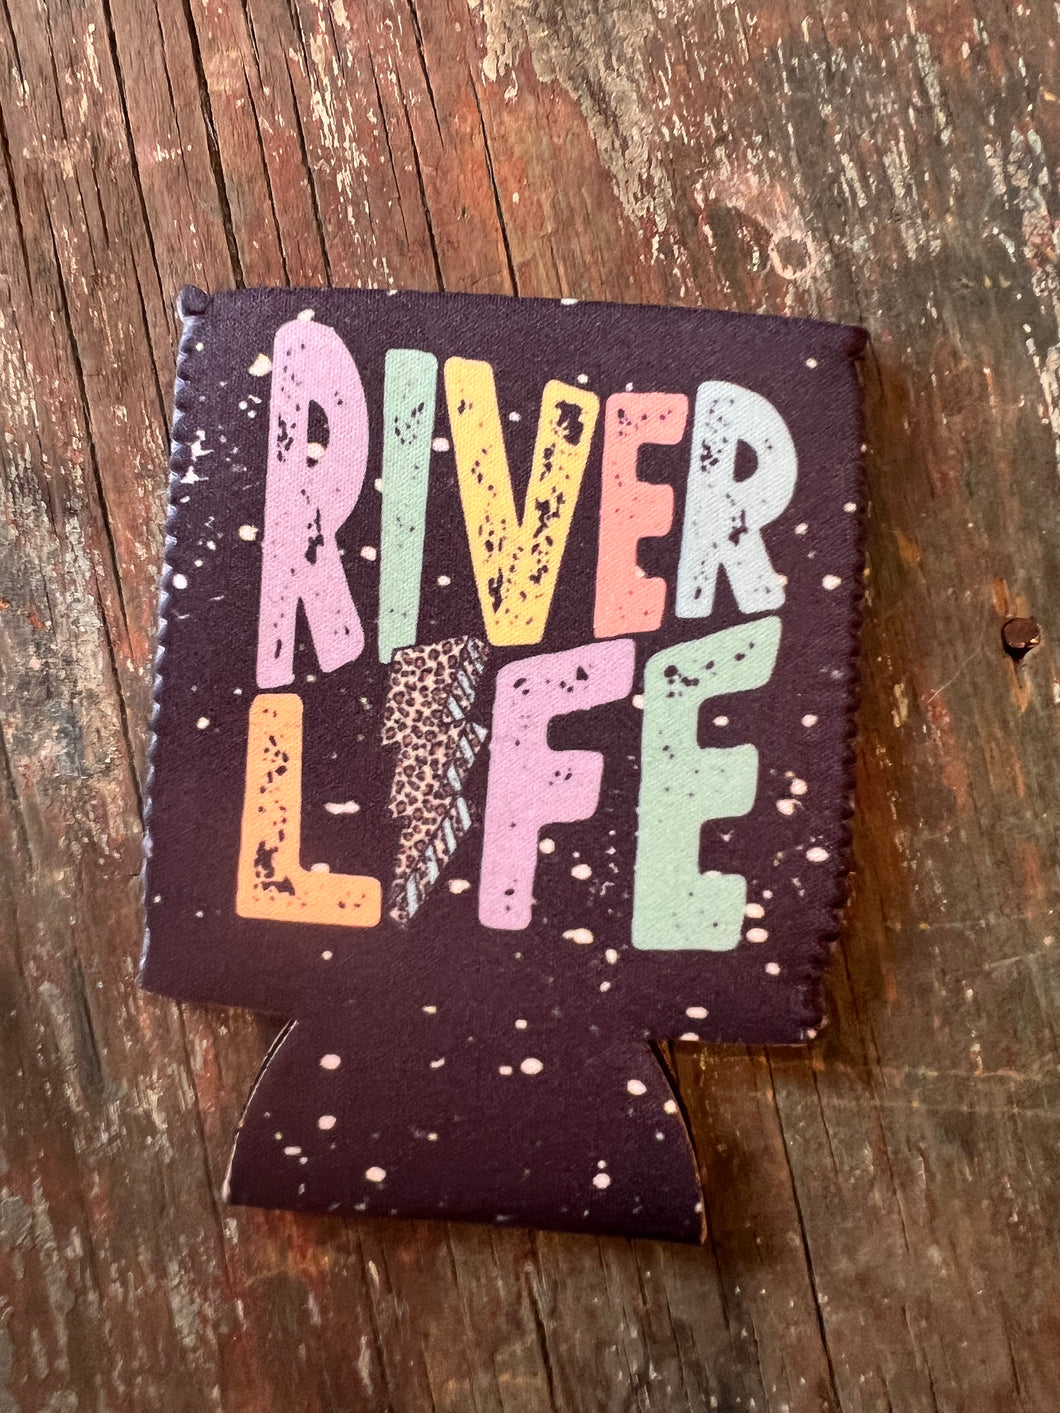 River life drink sleeve